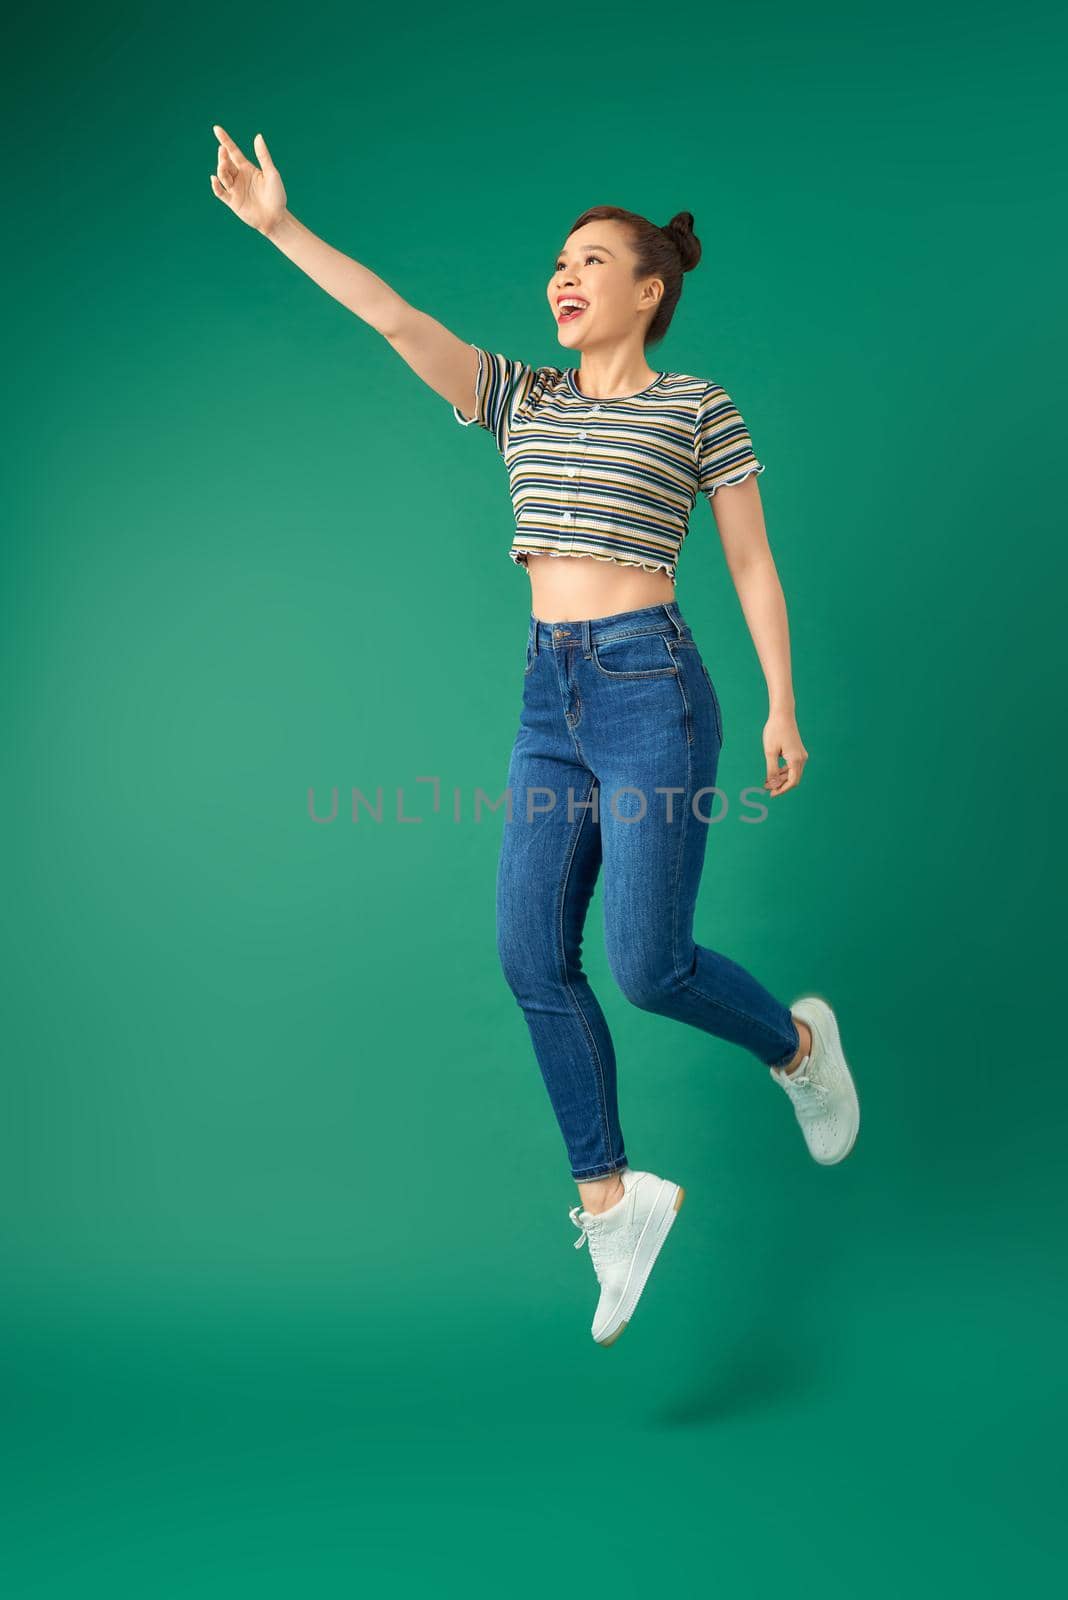 Full length of cheerful young Asian woman or teenage girl jumping in air over green background. by makidotvn